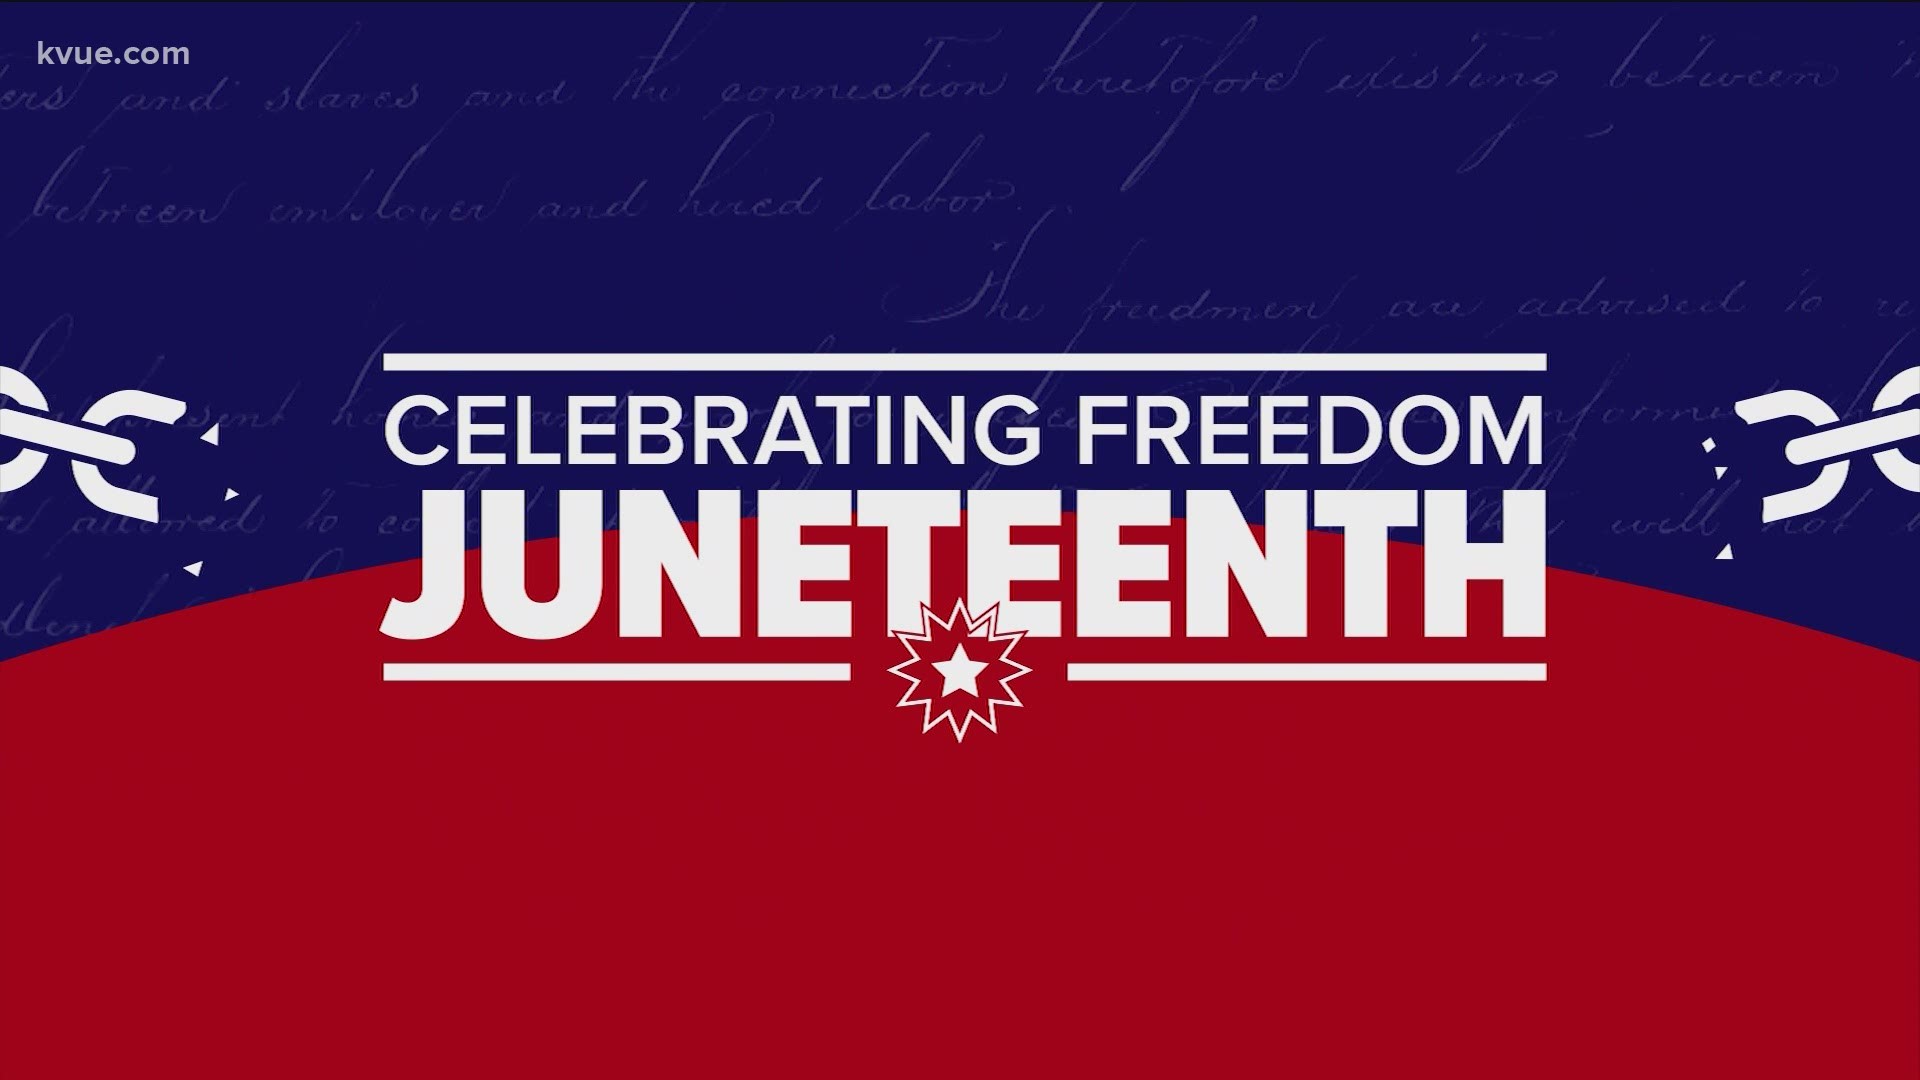 Austin's Juneteenth parade returned this year after organizers had to cancel in 2020 due to the pandemic. The parade has been an Austin tradition since 2003.